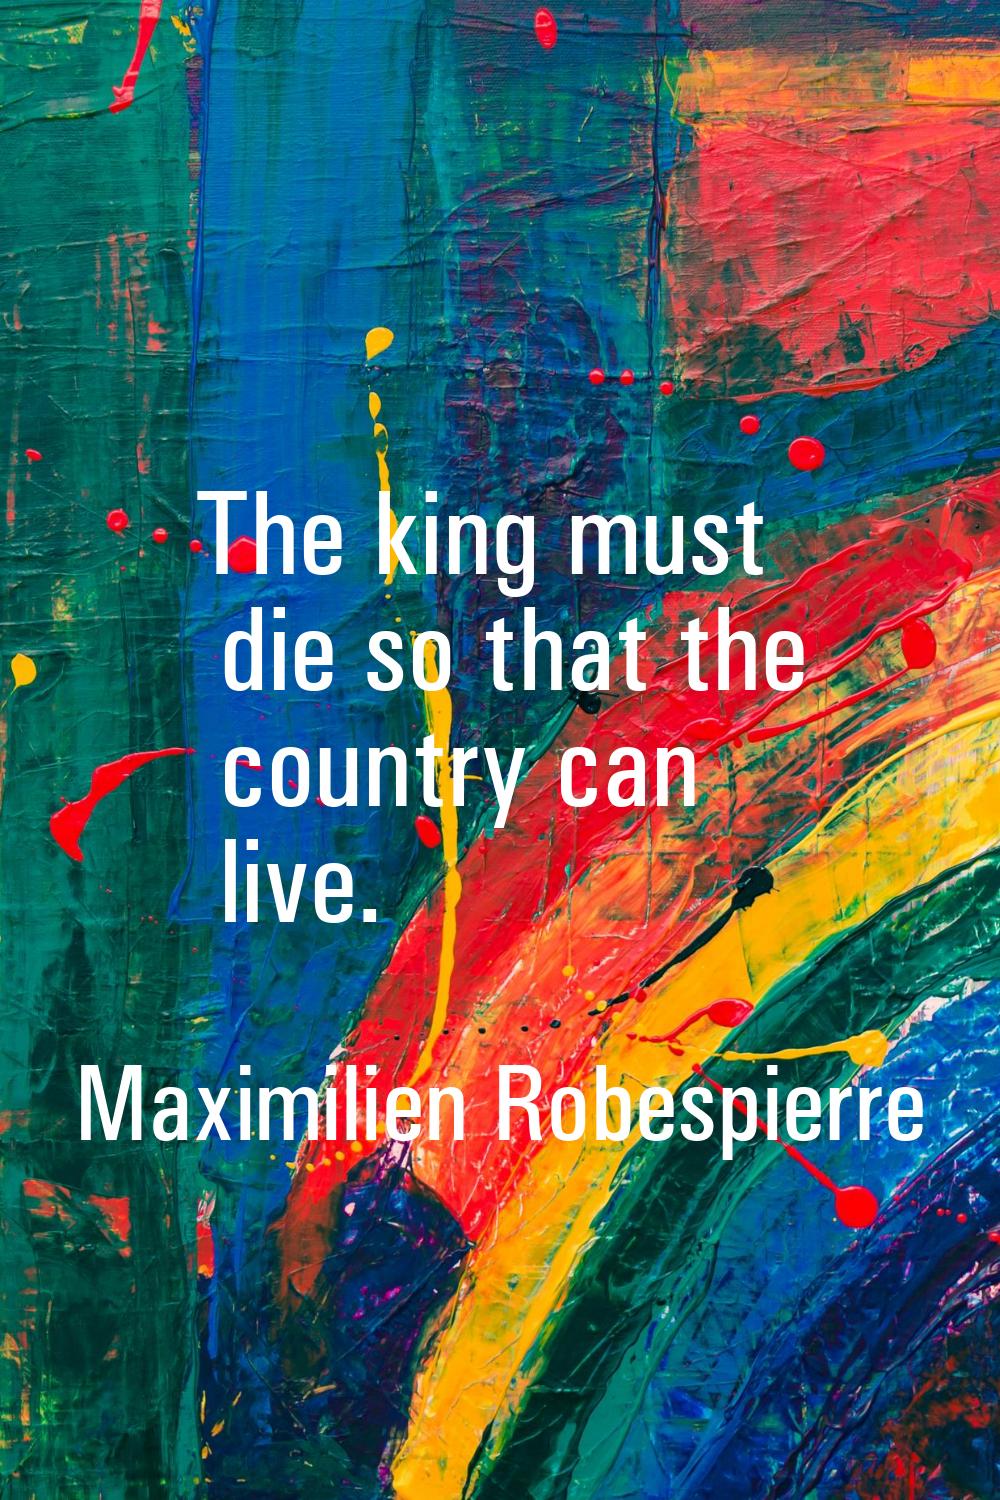 The king must die so that the country can live.